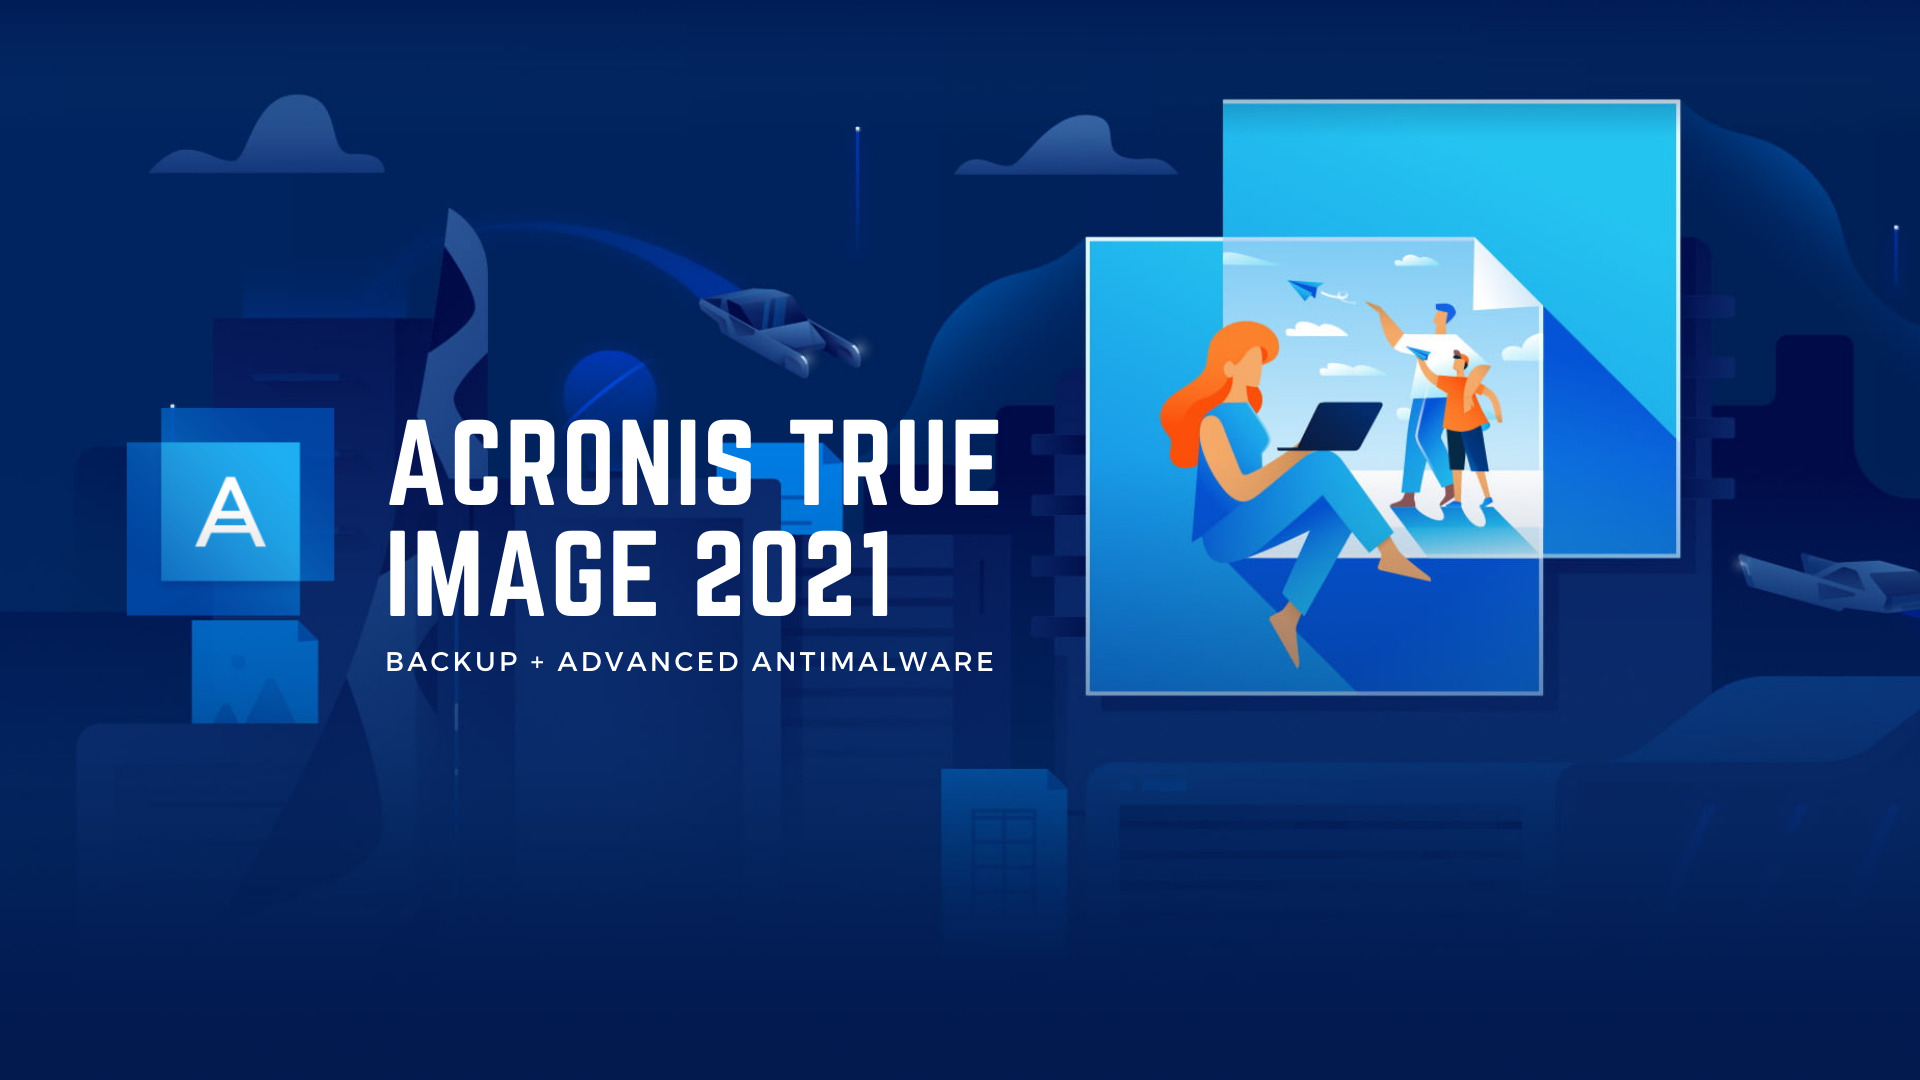 Acronis True Image 2021 Officially Released